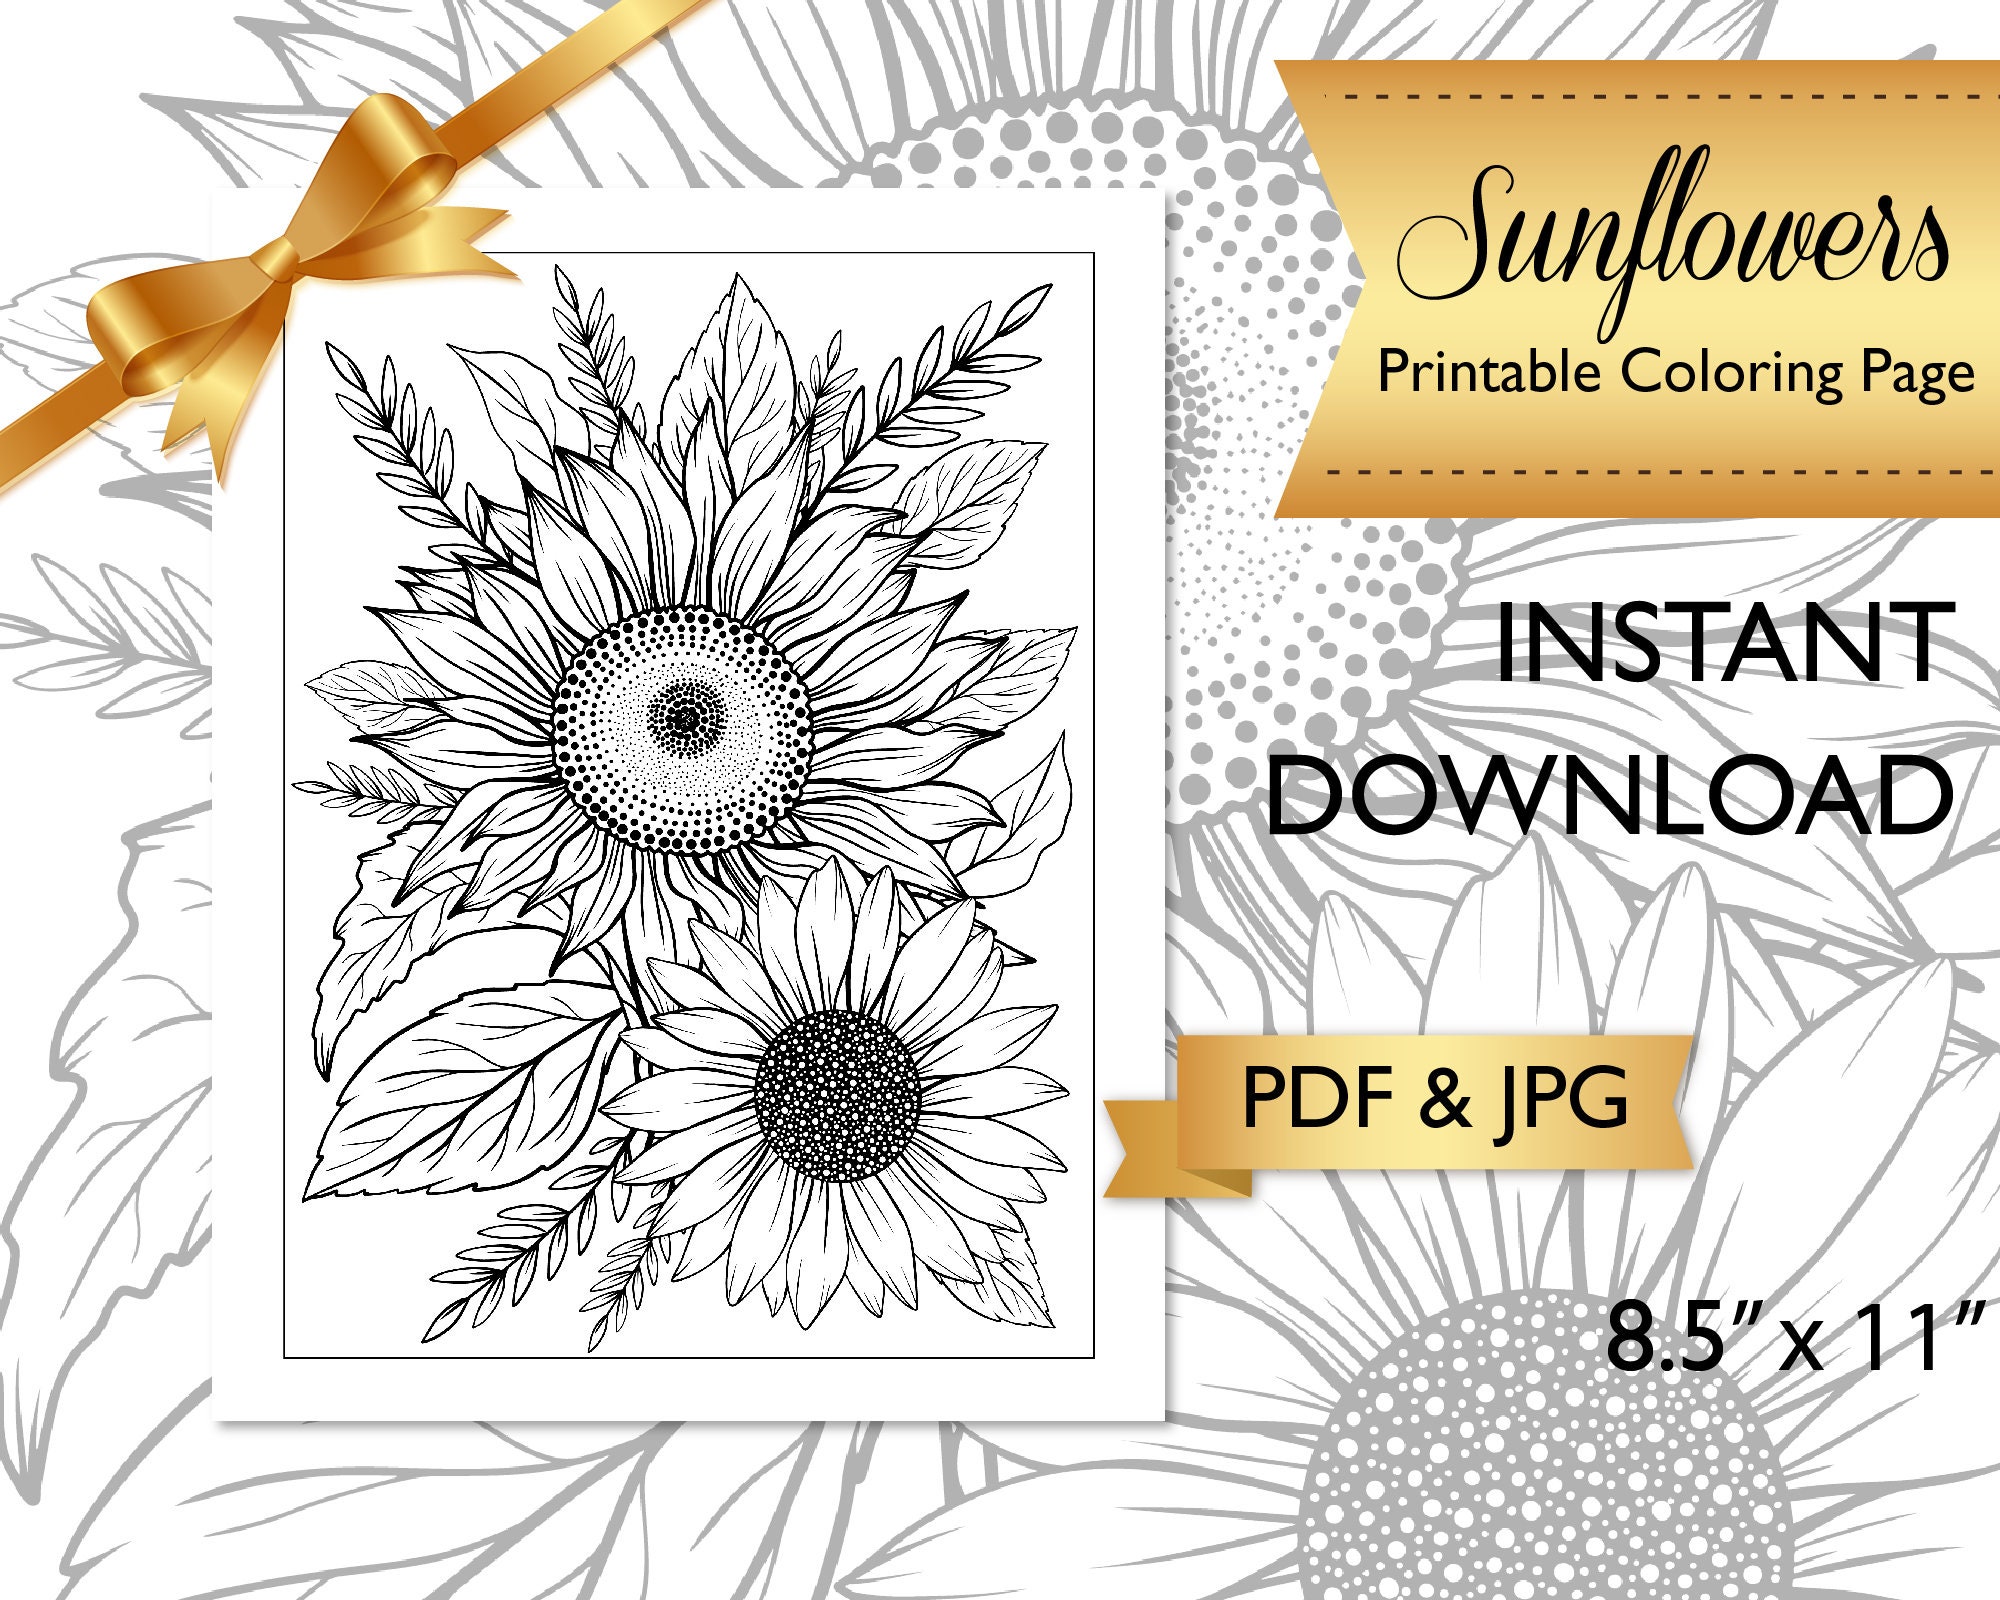 Printable adult coloring page flower coloring page for adults sunflowers coloring page pdf coloring at home meditative coloring v